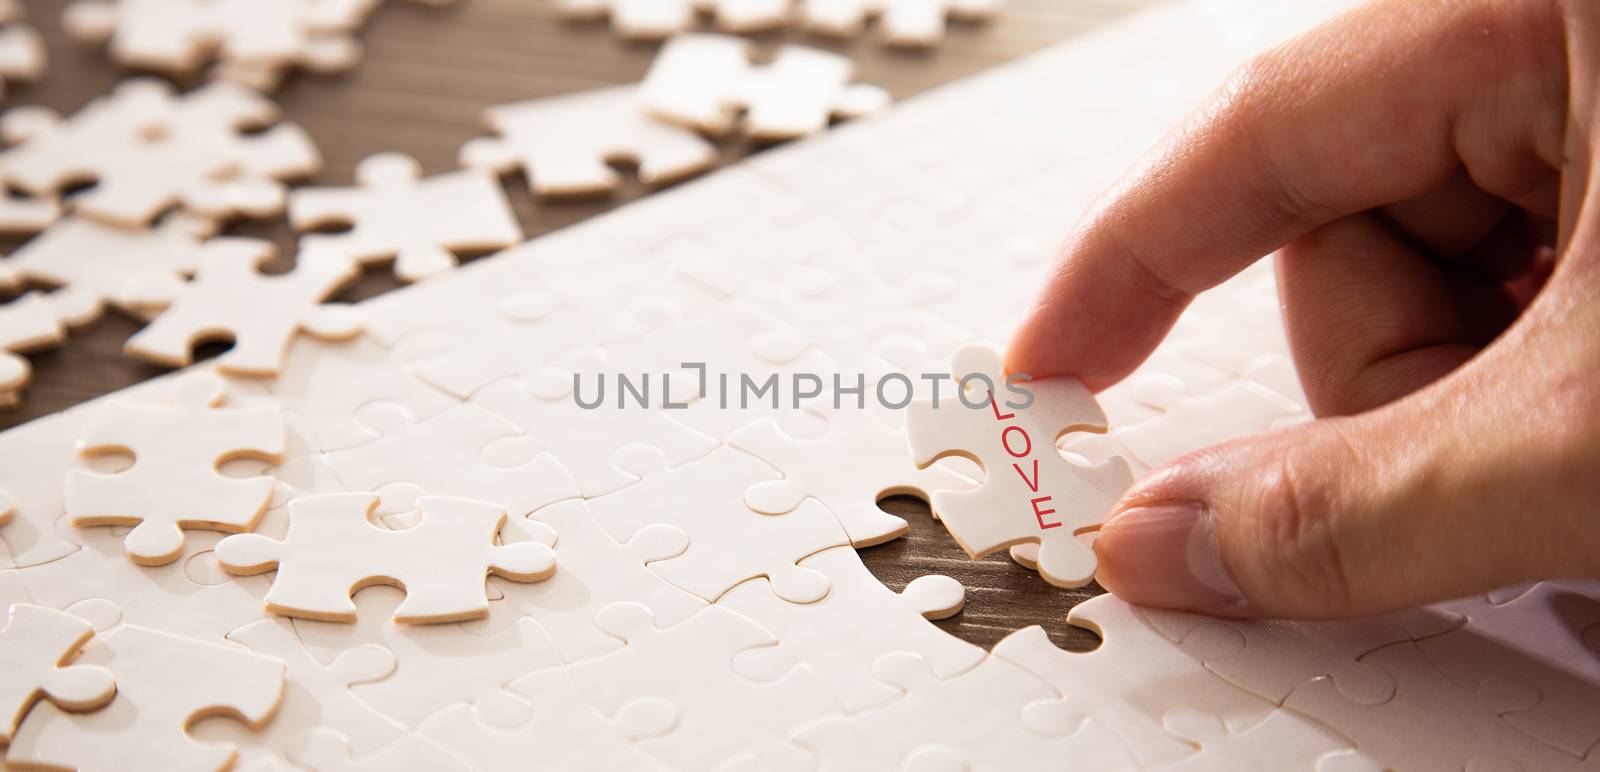 Hand completing the a last piece of jigsaw puzzle with love word by tehcheesiong